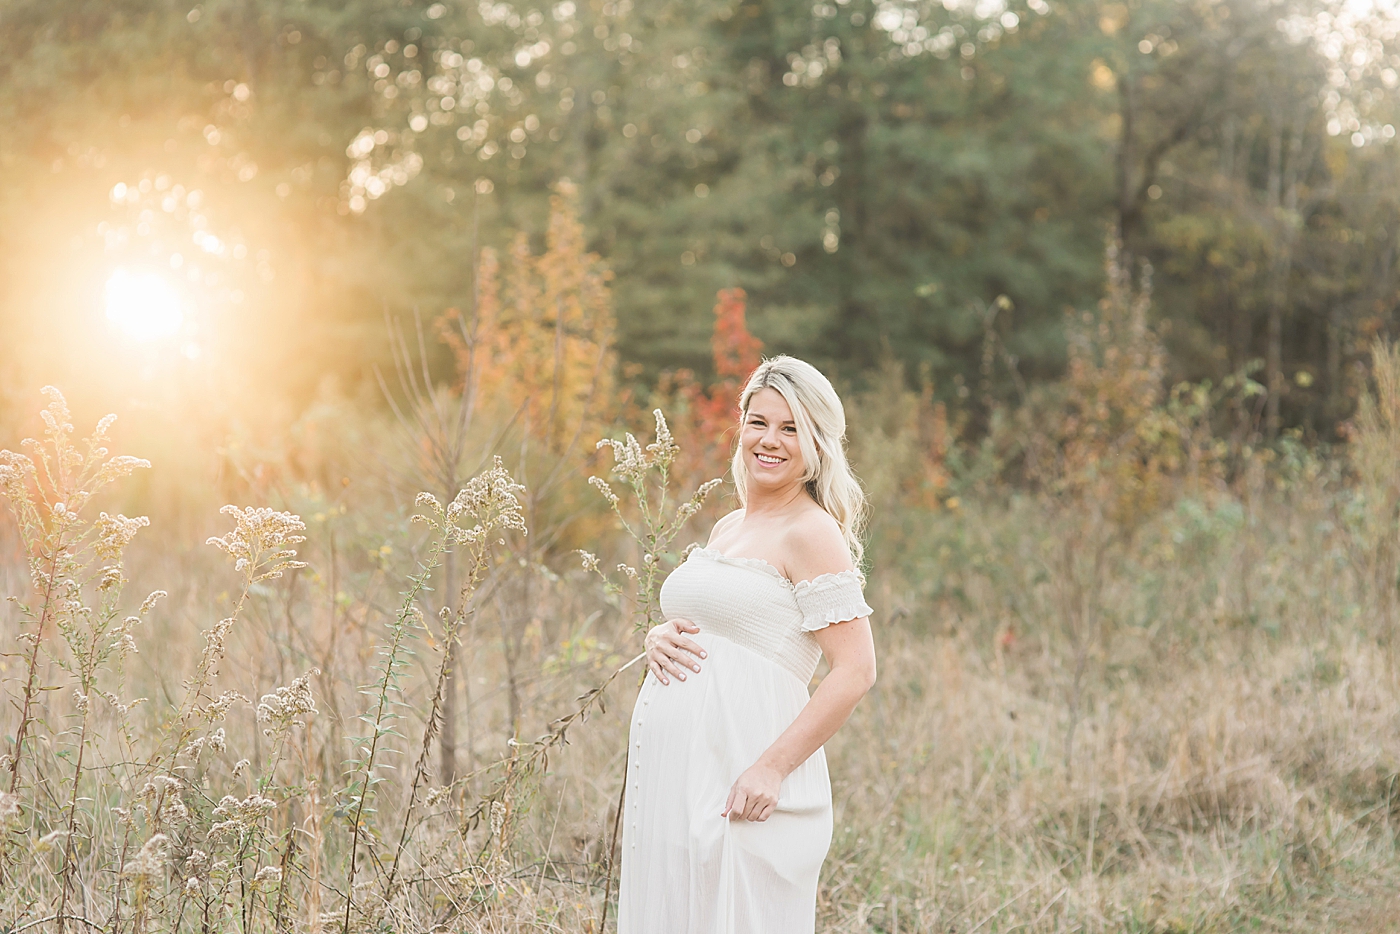 Mom to be in long white dress in a field at sunset | Photo by Anna Wisjo 